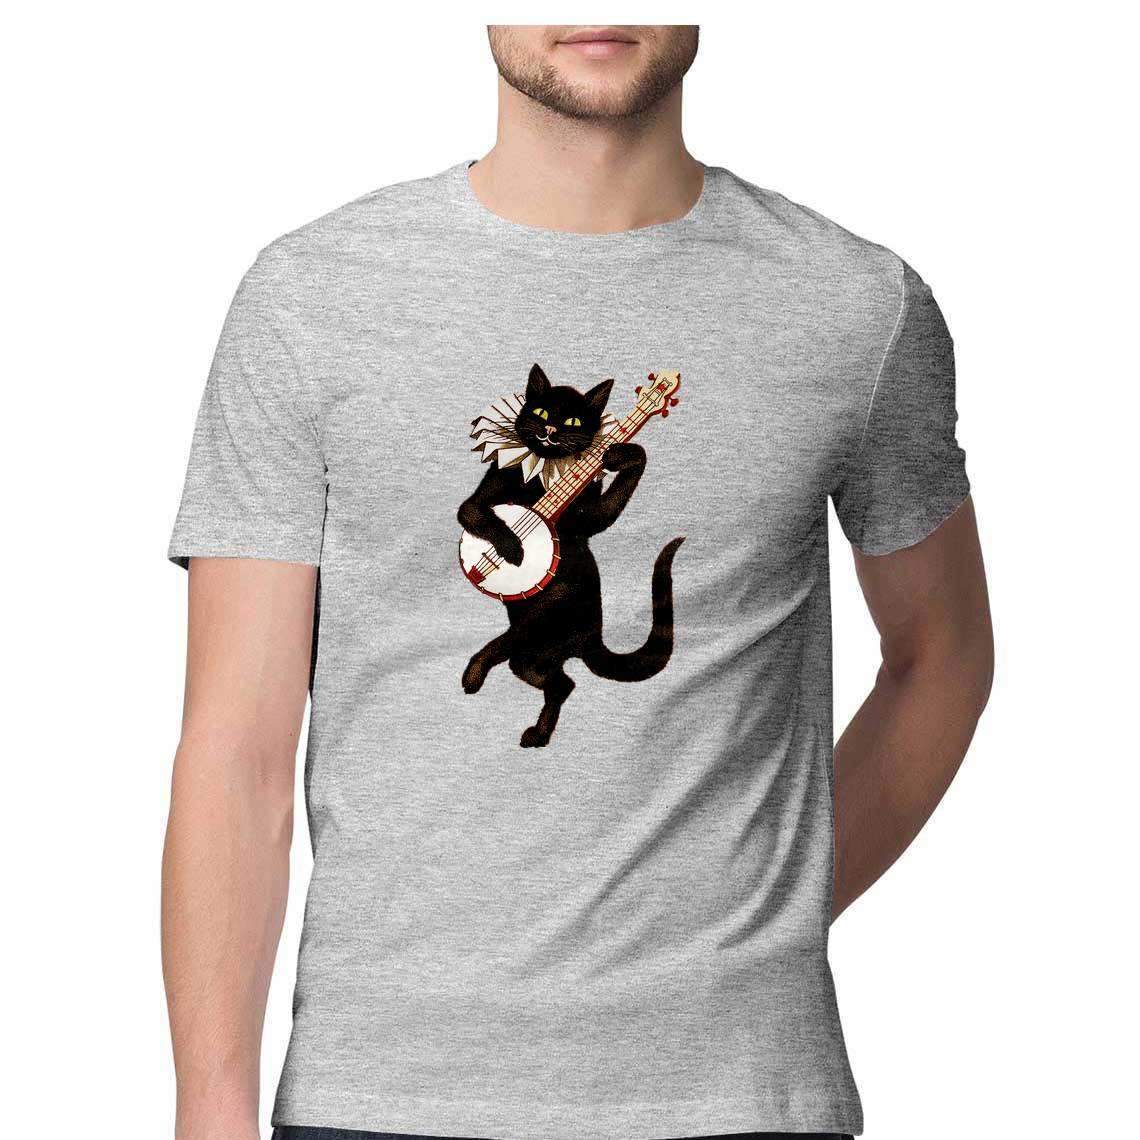 Mr. Whisker's playing the Banjo Men's Graphic T-Shirt - CBD Store India